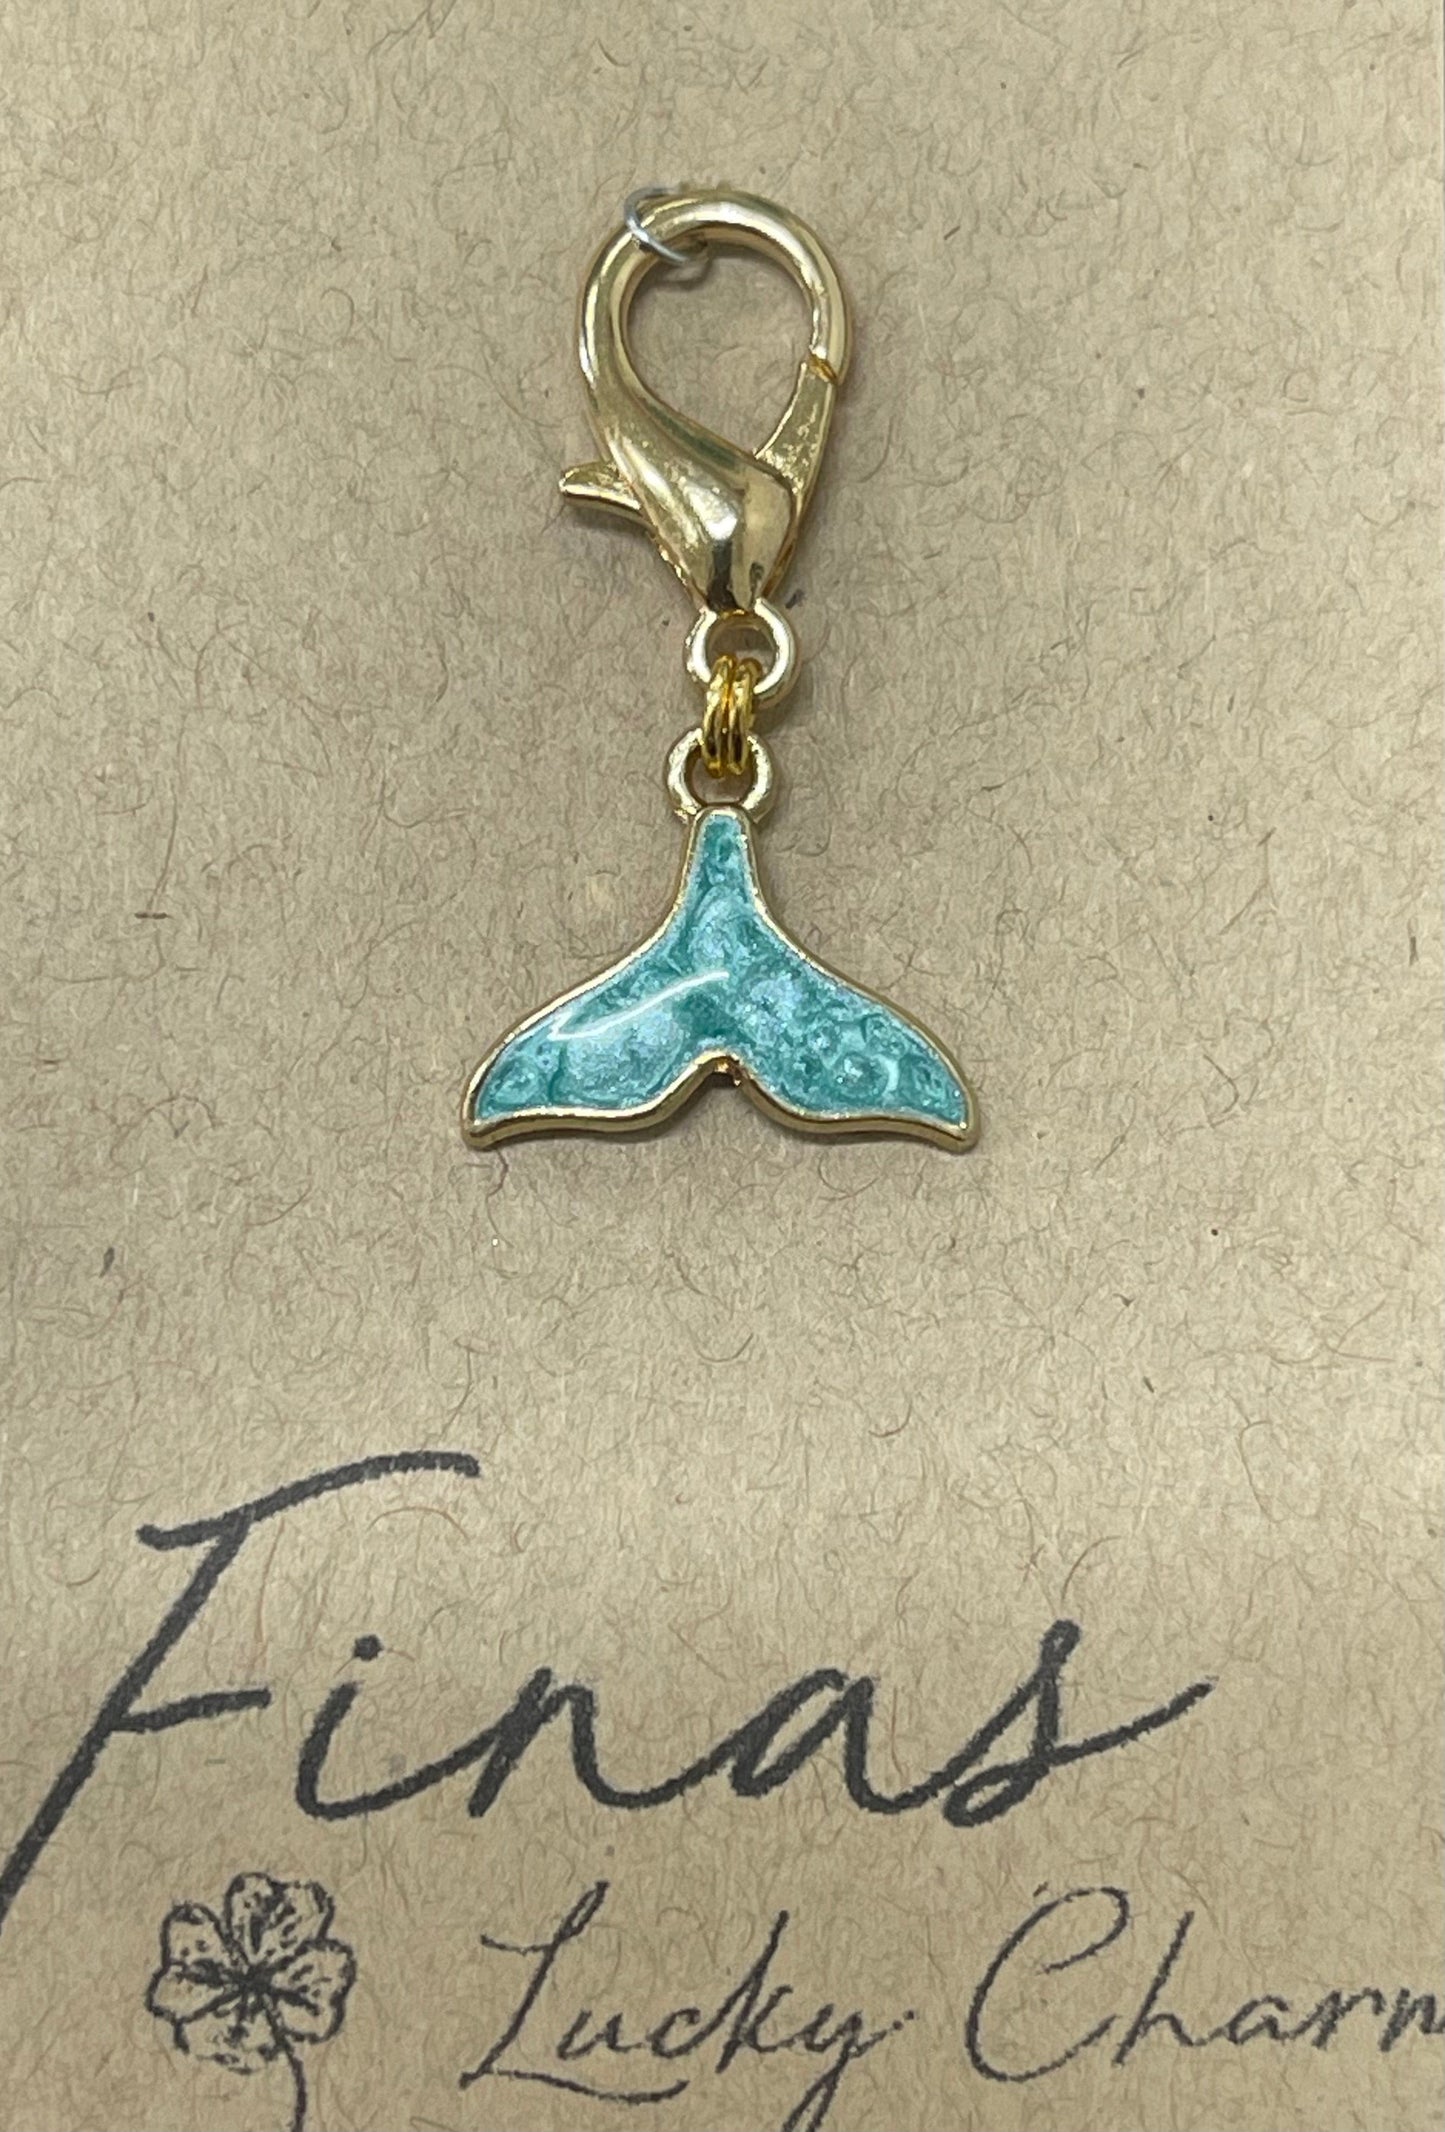 Fina's Lucky Charm charm Whale/Mermaid Tail (Teal) Fina's Lucky Charm equestrian team apparel online tack store mobile tack store custom farm apparel custom show stable clothing equestrian lifestyle horse show clothing riding clothes horses equestrian tack store